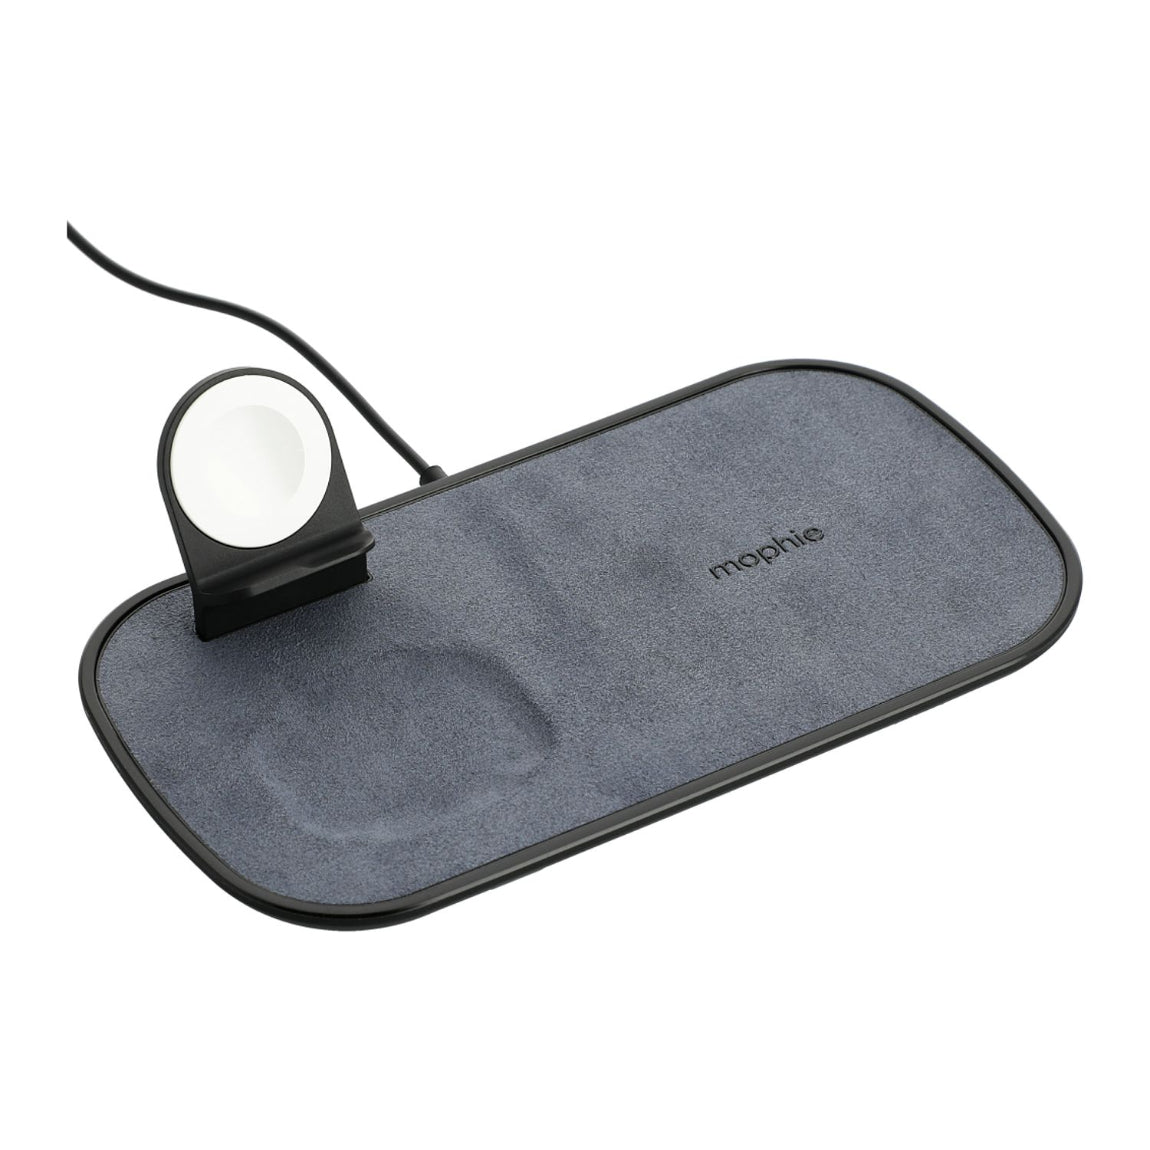 mophie® 3-in-1 Fabric Wireless Charging Pad